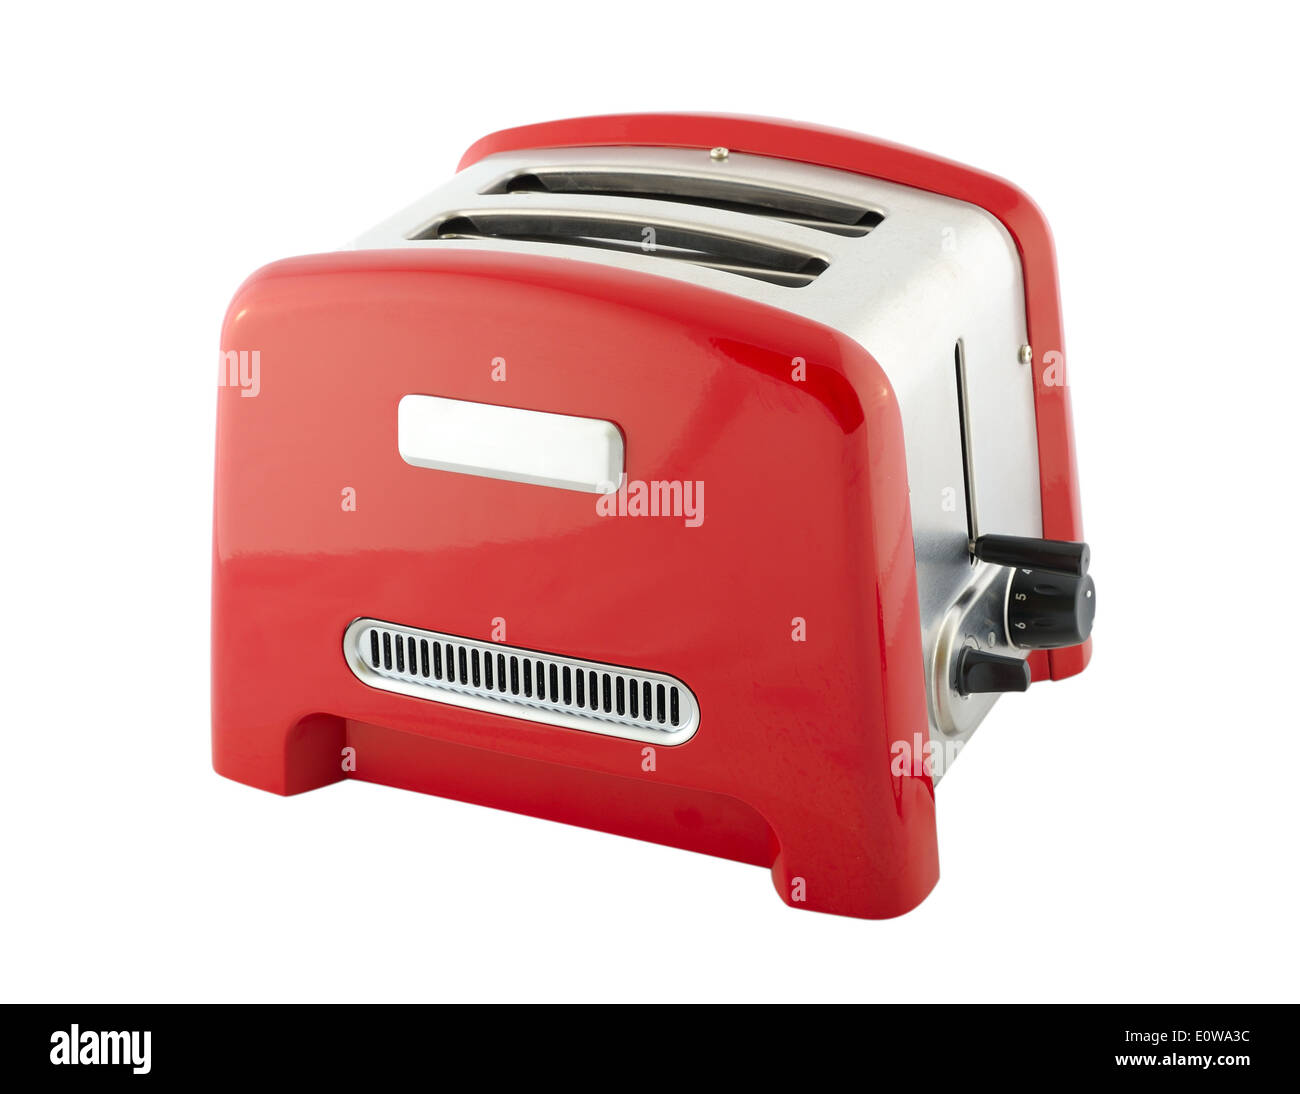 Kitchen appliances - toaster of and color, isolated a white background Stock Photo Alamy